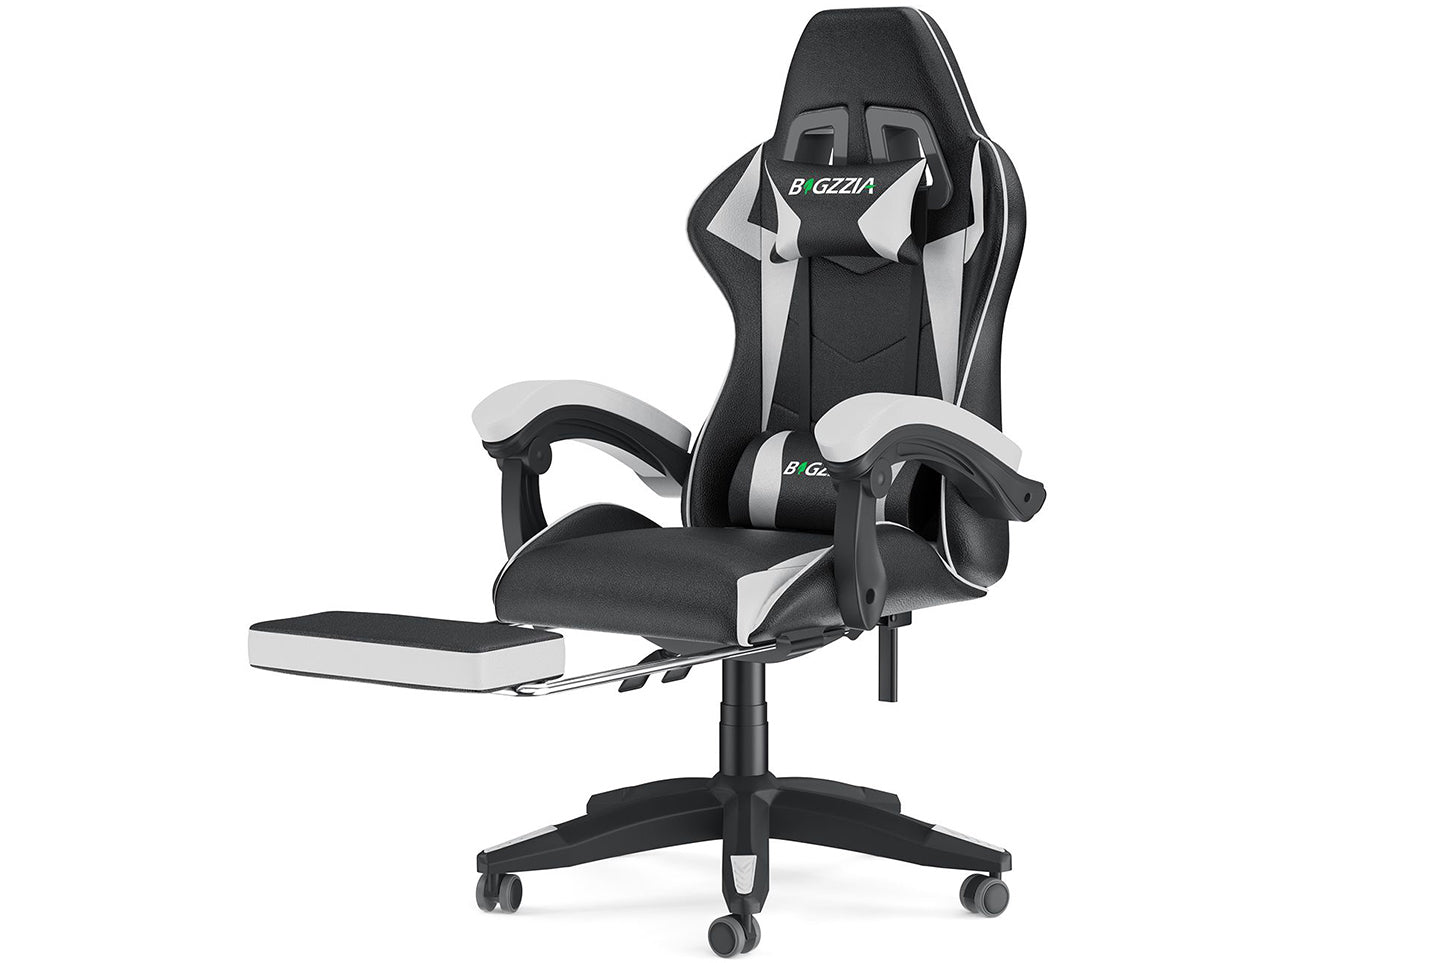 Ergonomic Gaming Chair 155¡ã Reclining Swivel Chair with Headrest Footrest Lumbar Support PU Leather Office Chair Black/White